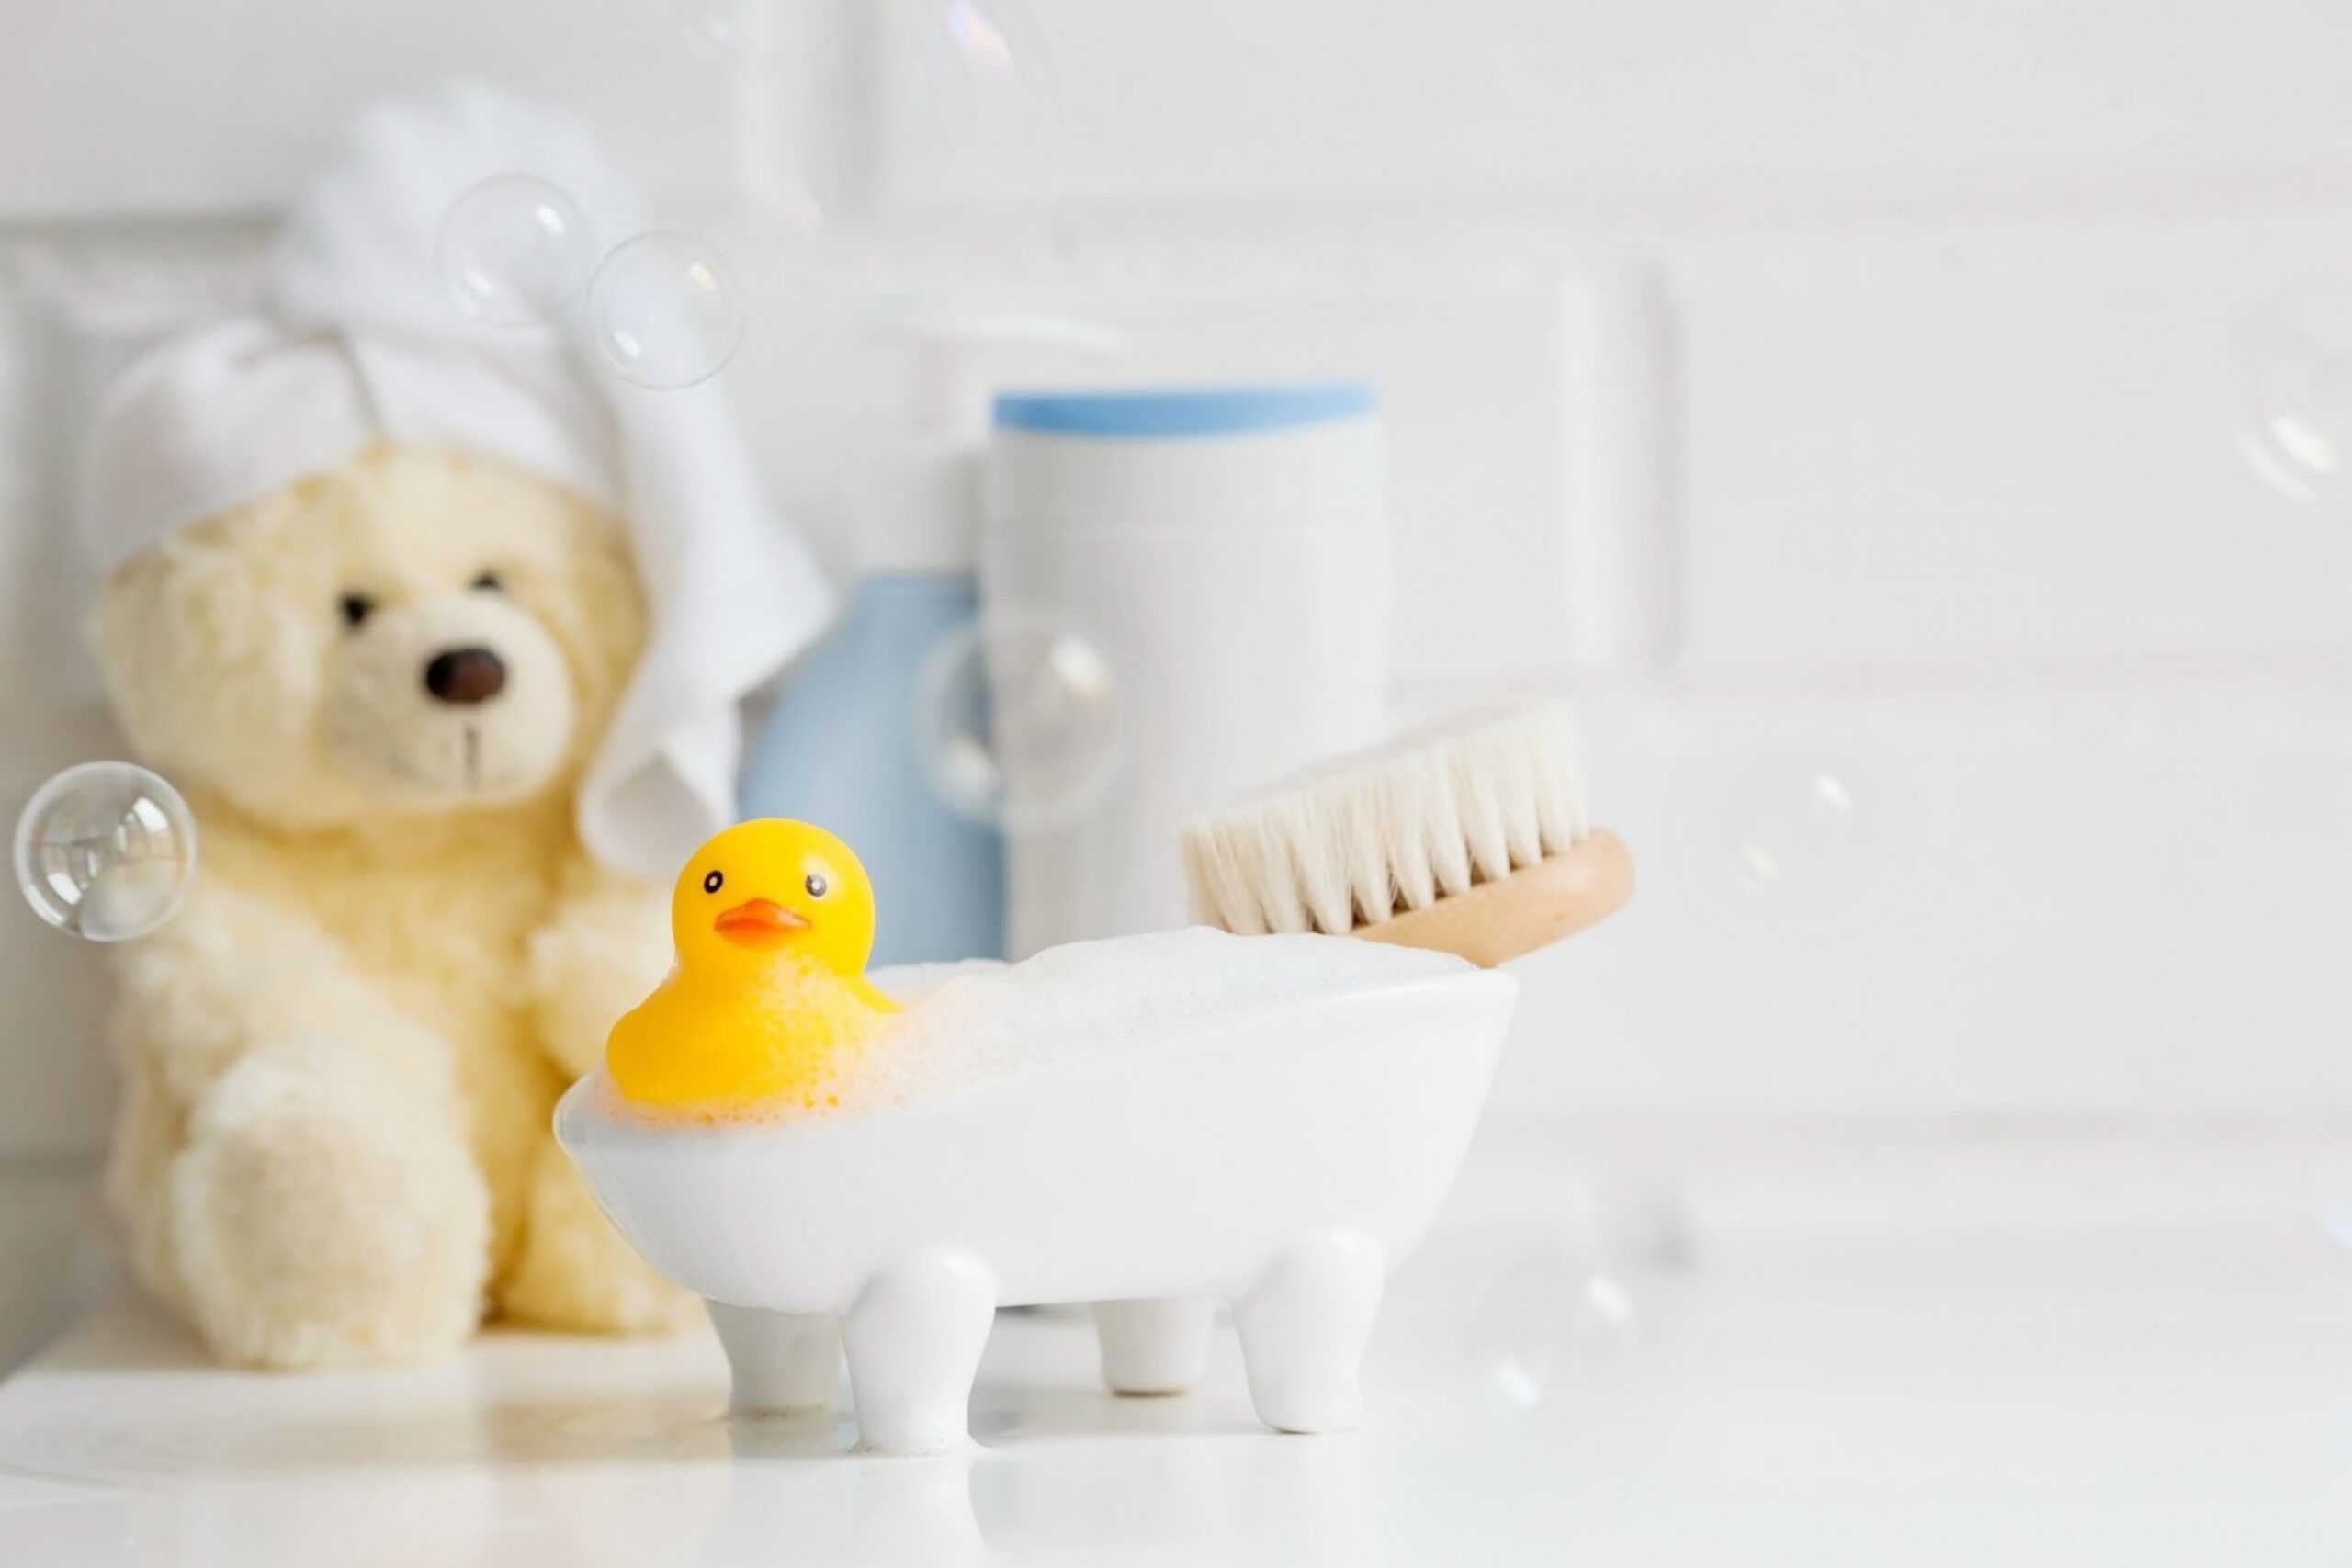 How to Clean Bath Toys Tidyhere Image Children's Bath Accessories.